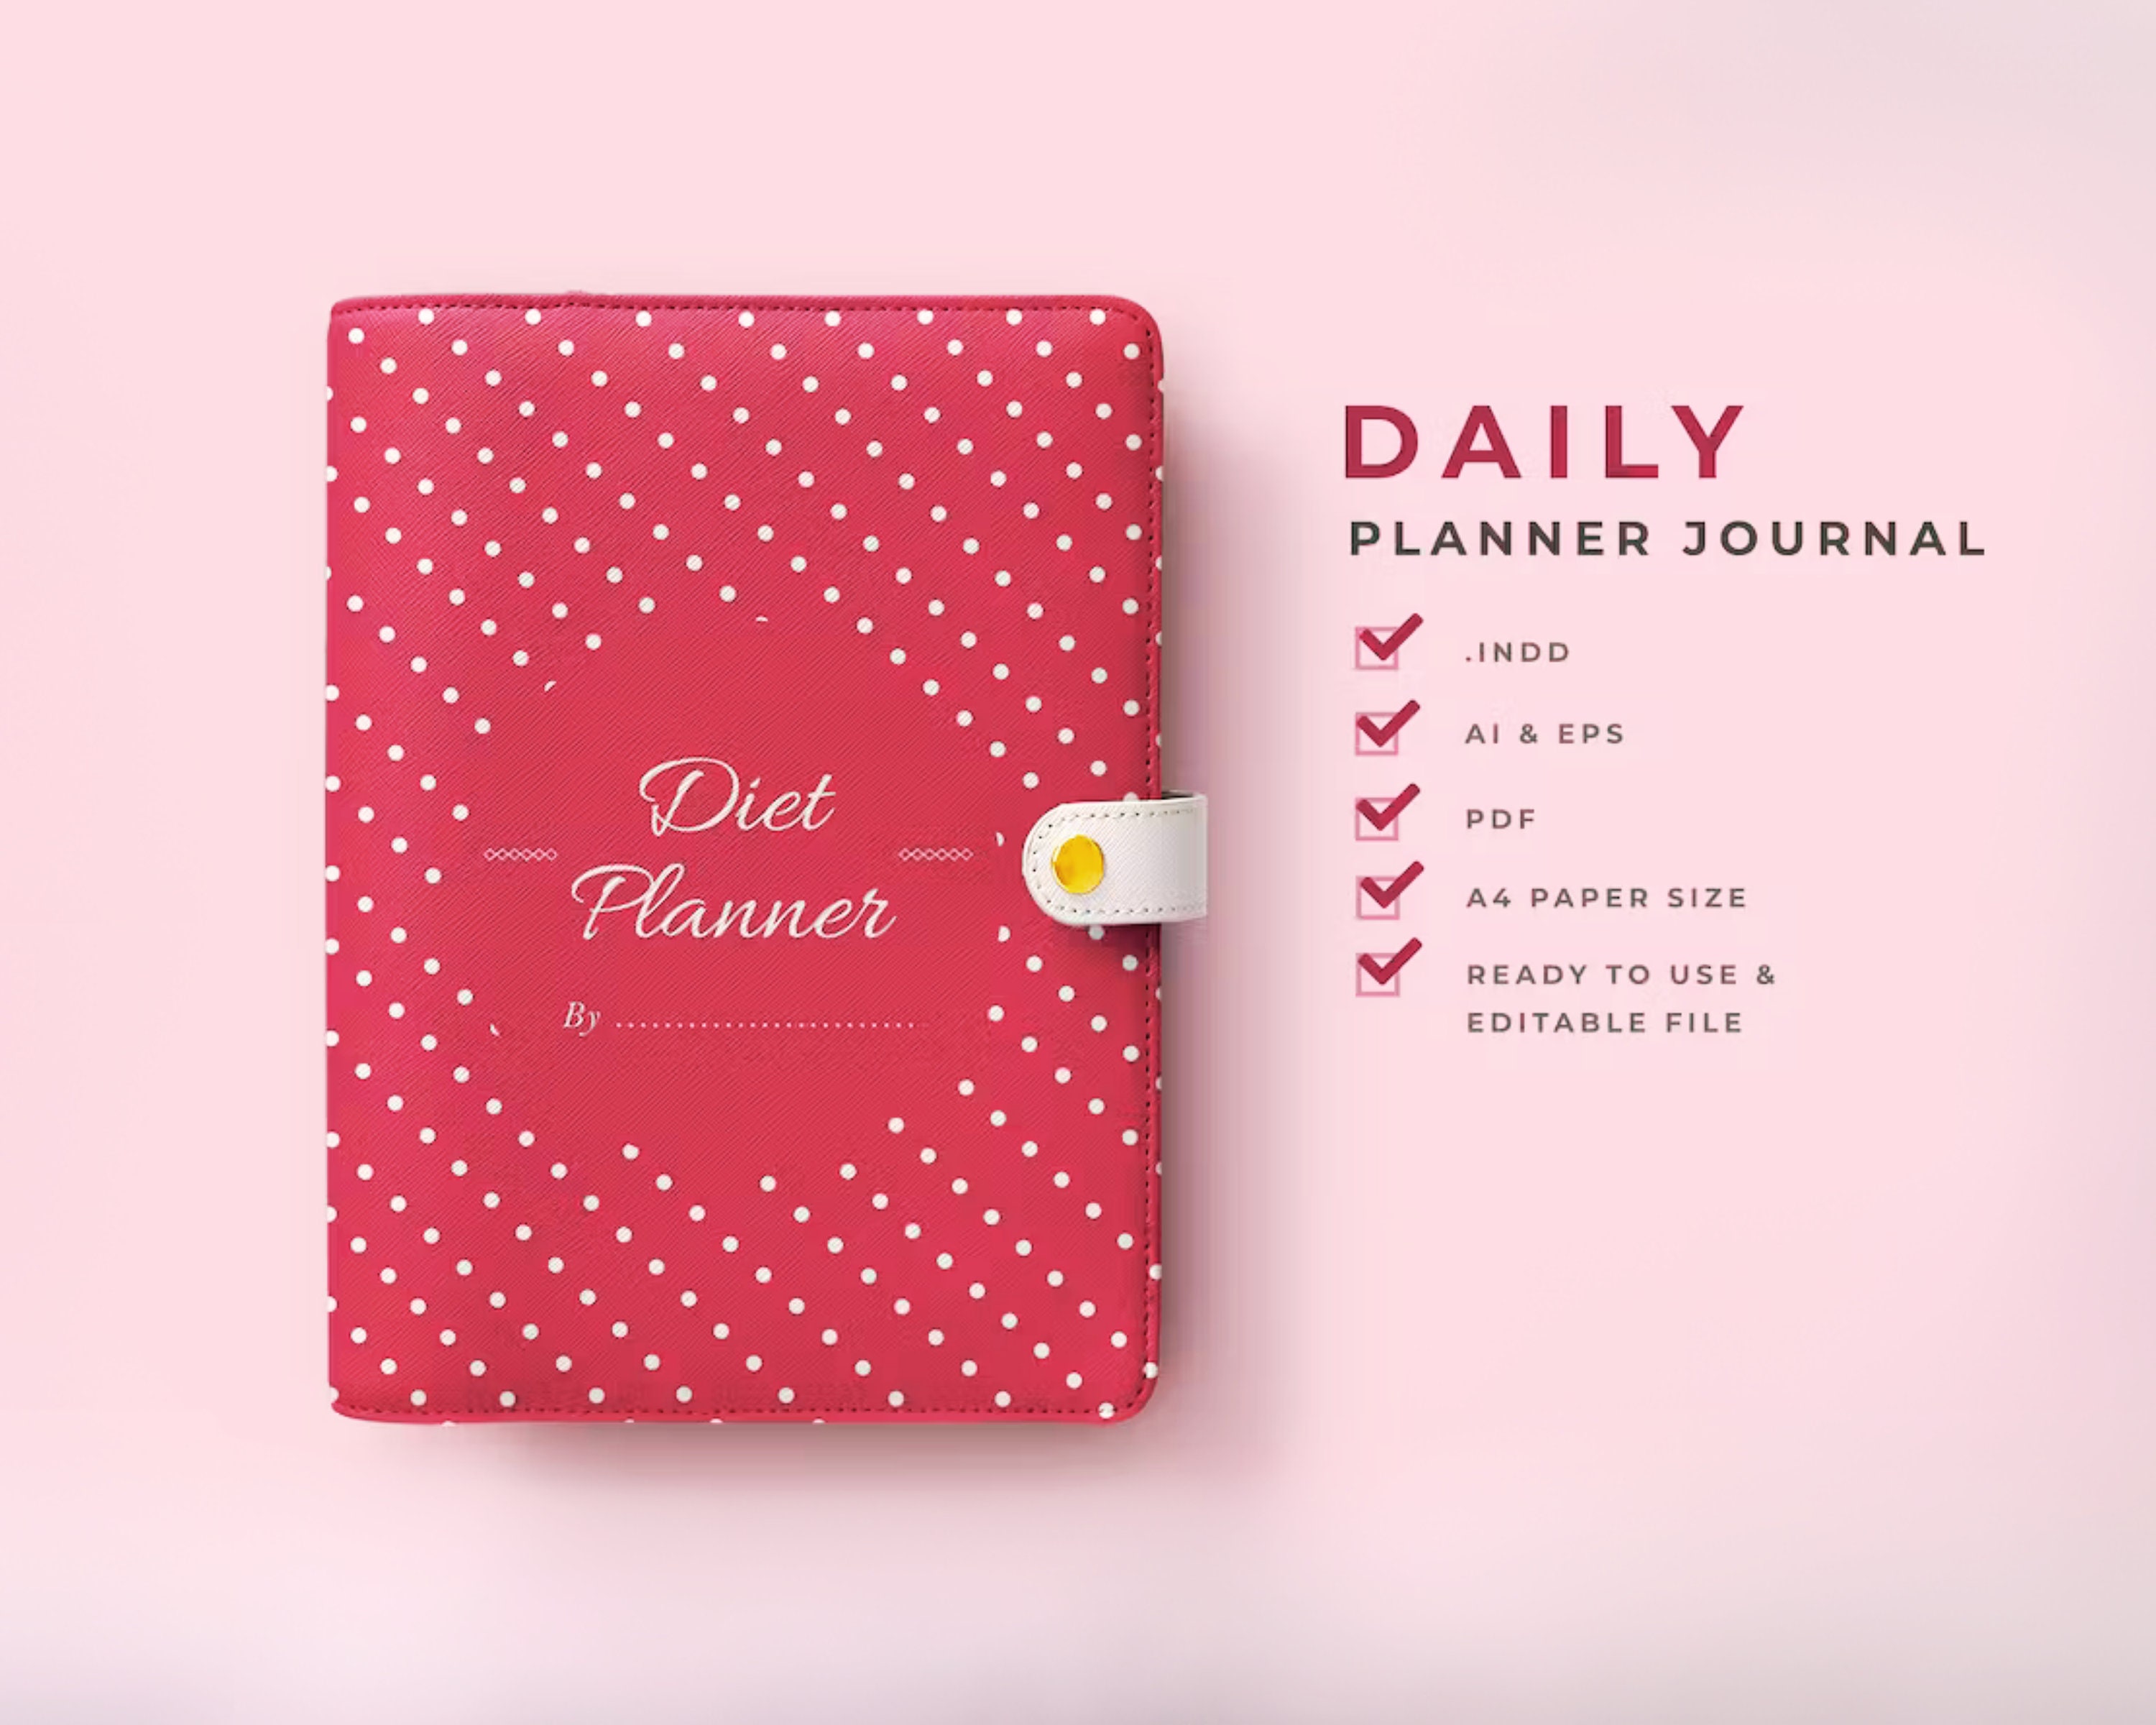 Journal Daily Planner: Floral Daily Planner and Journal  Perfect for Women and Girls| Boost your Productivity and Creativity with this Charming Flo - 2